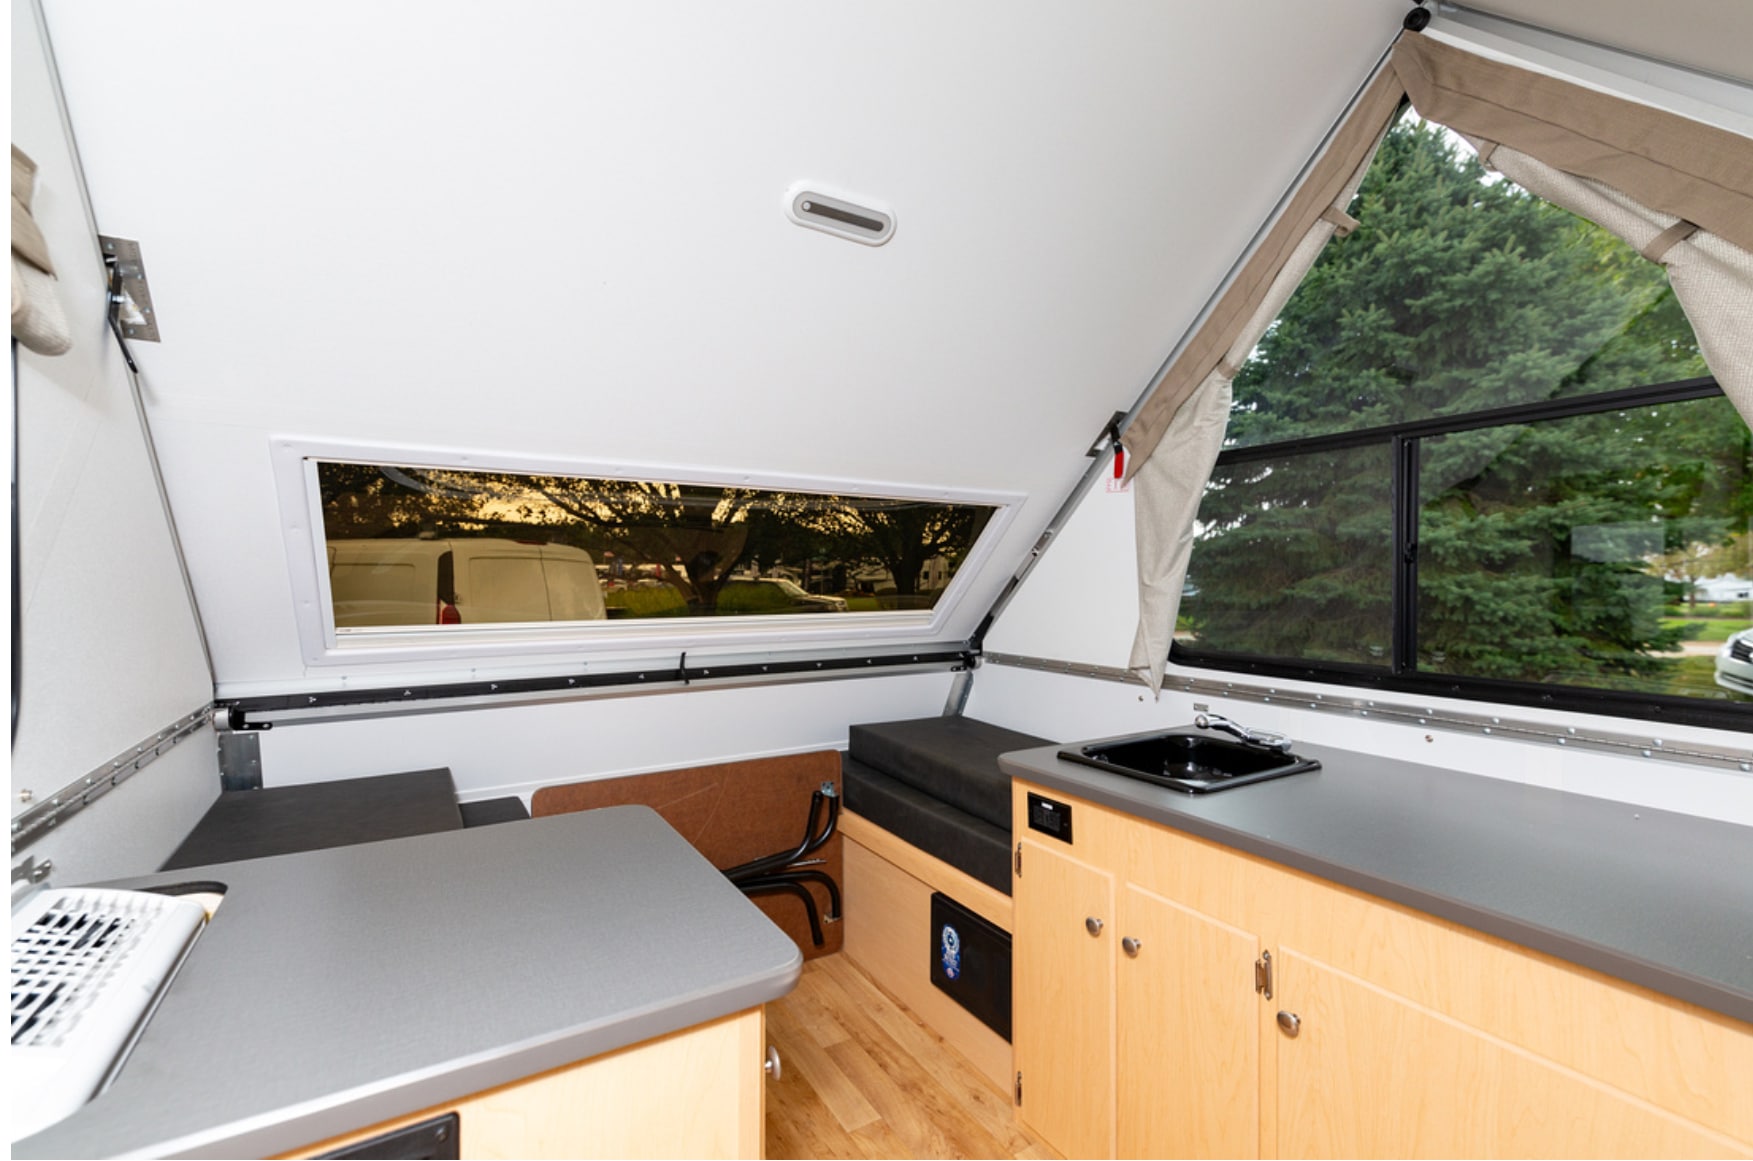 A small kitchen in a campervan with a window.